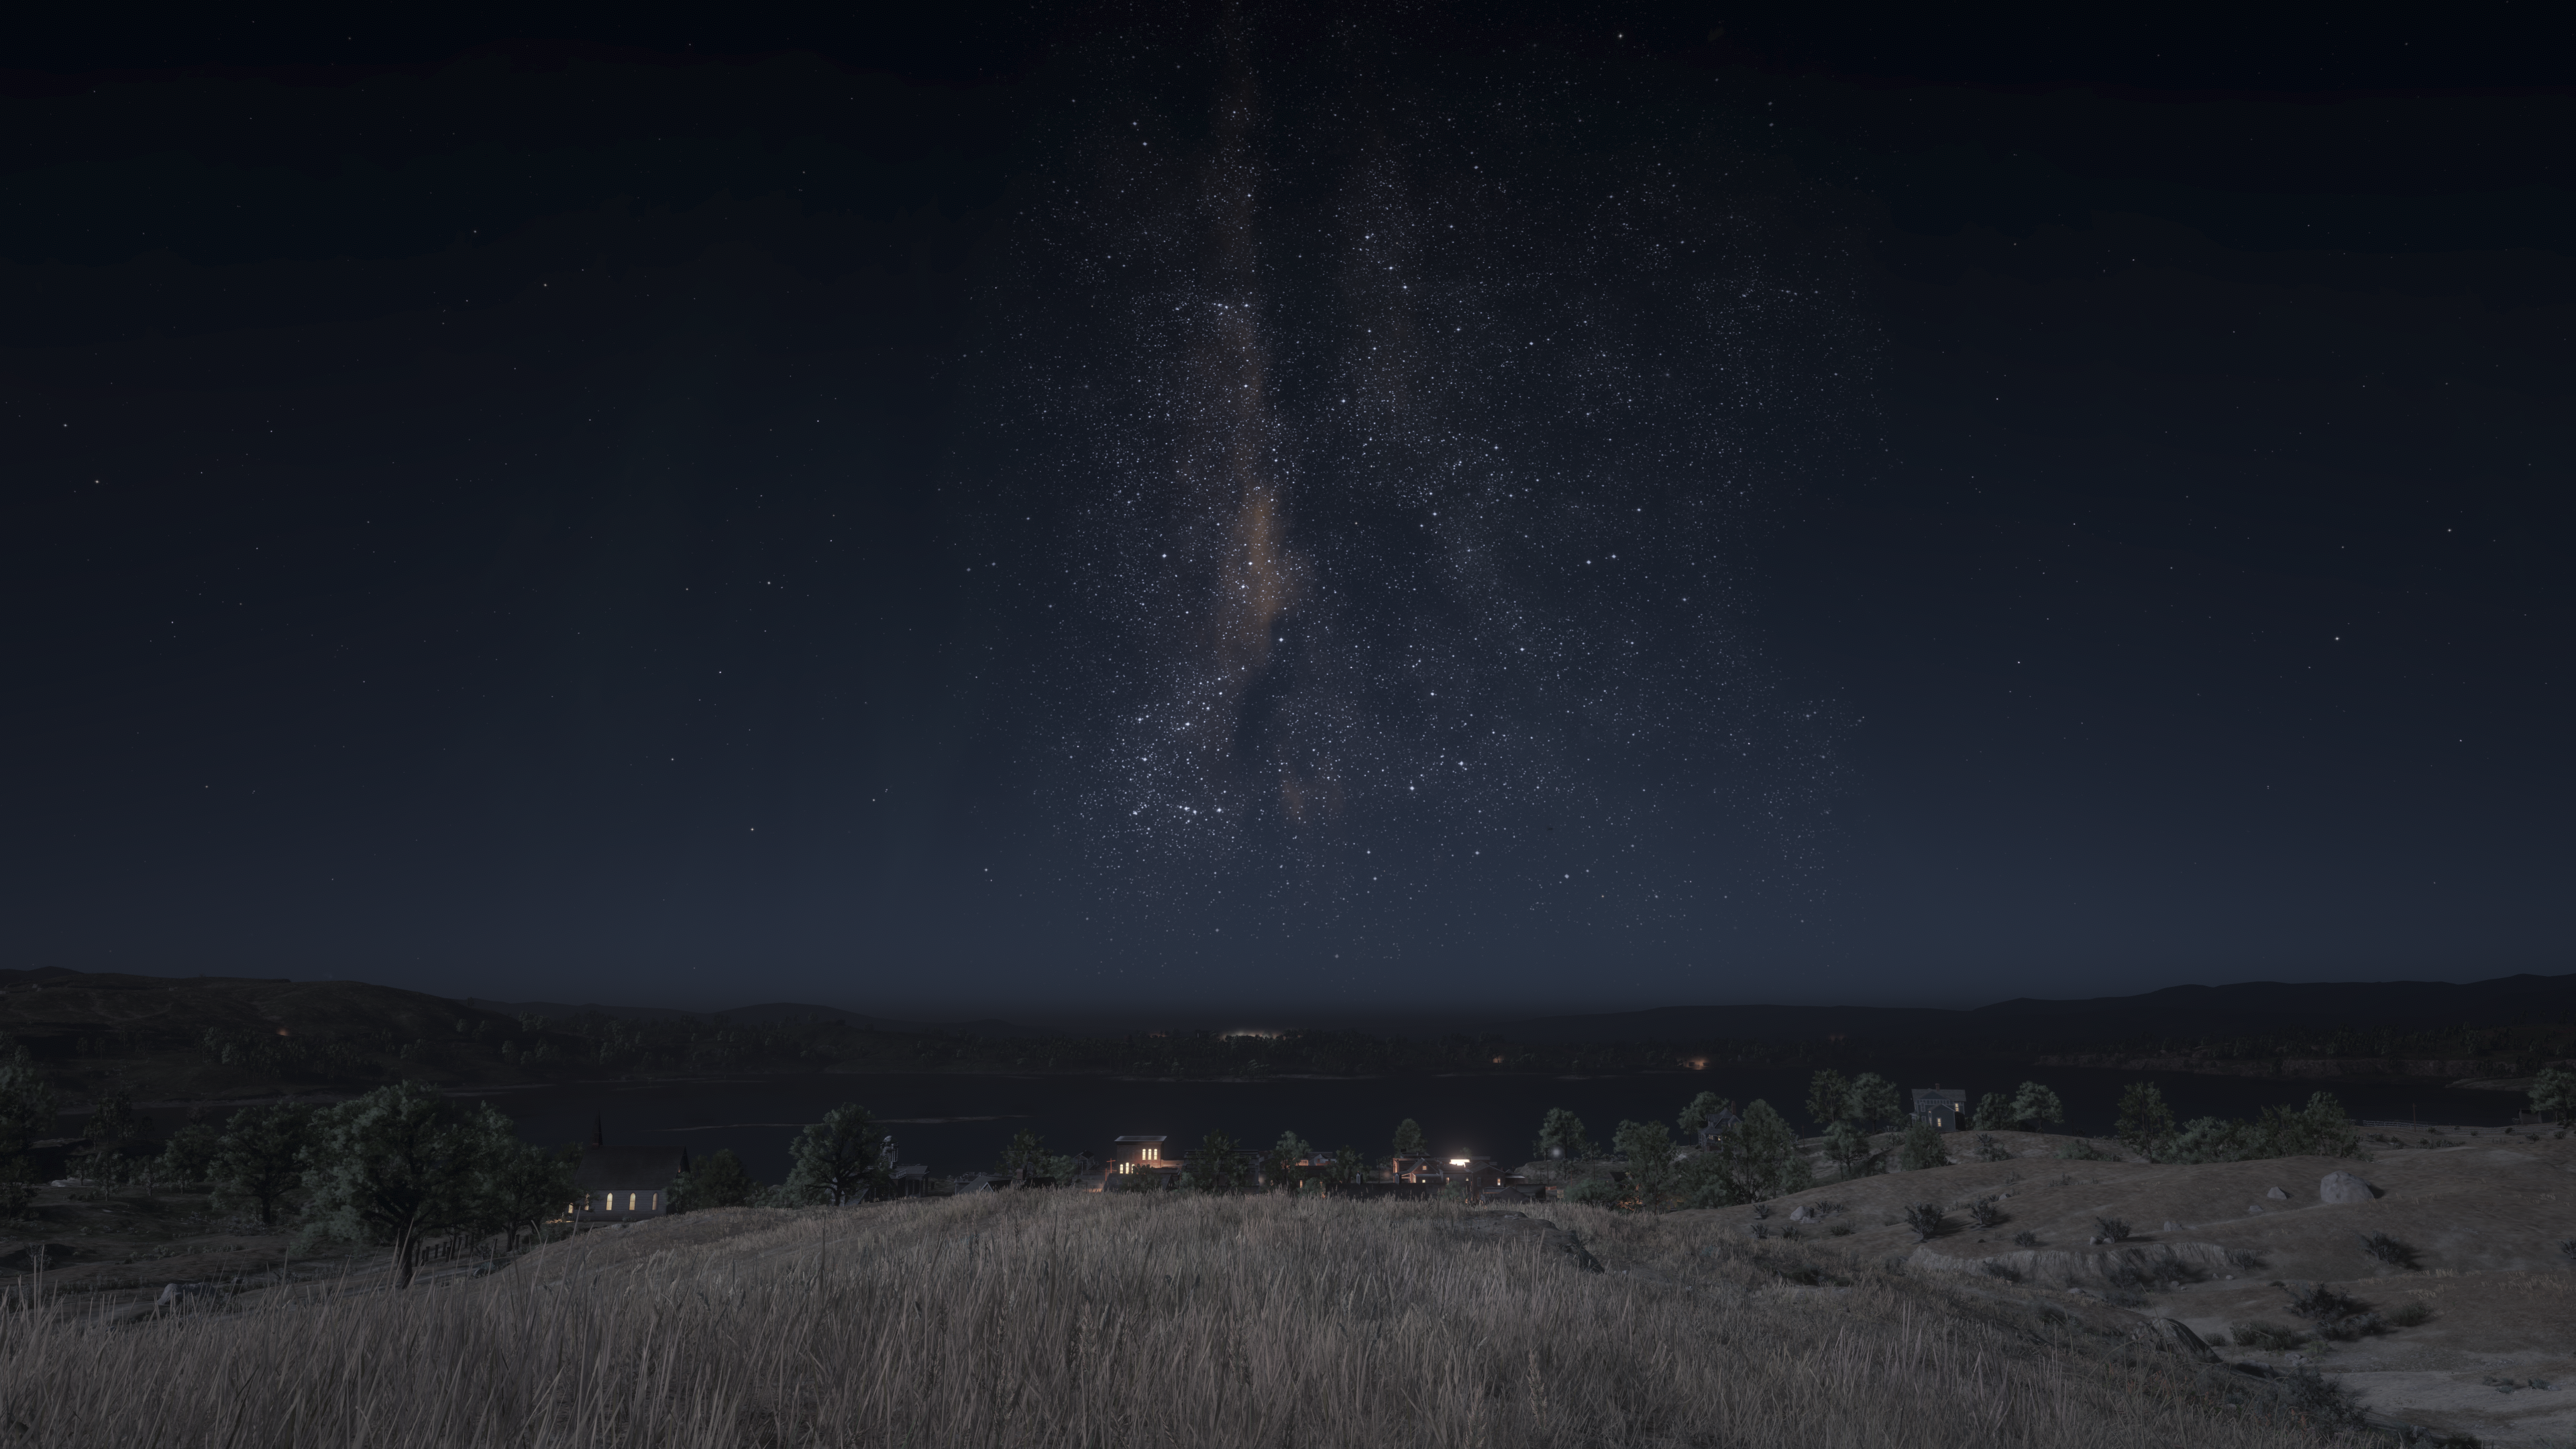 General 3840x2160 Red Dead Redemption 2 nature landscape video games stars sky simple background minimalism trees